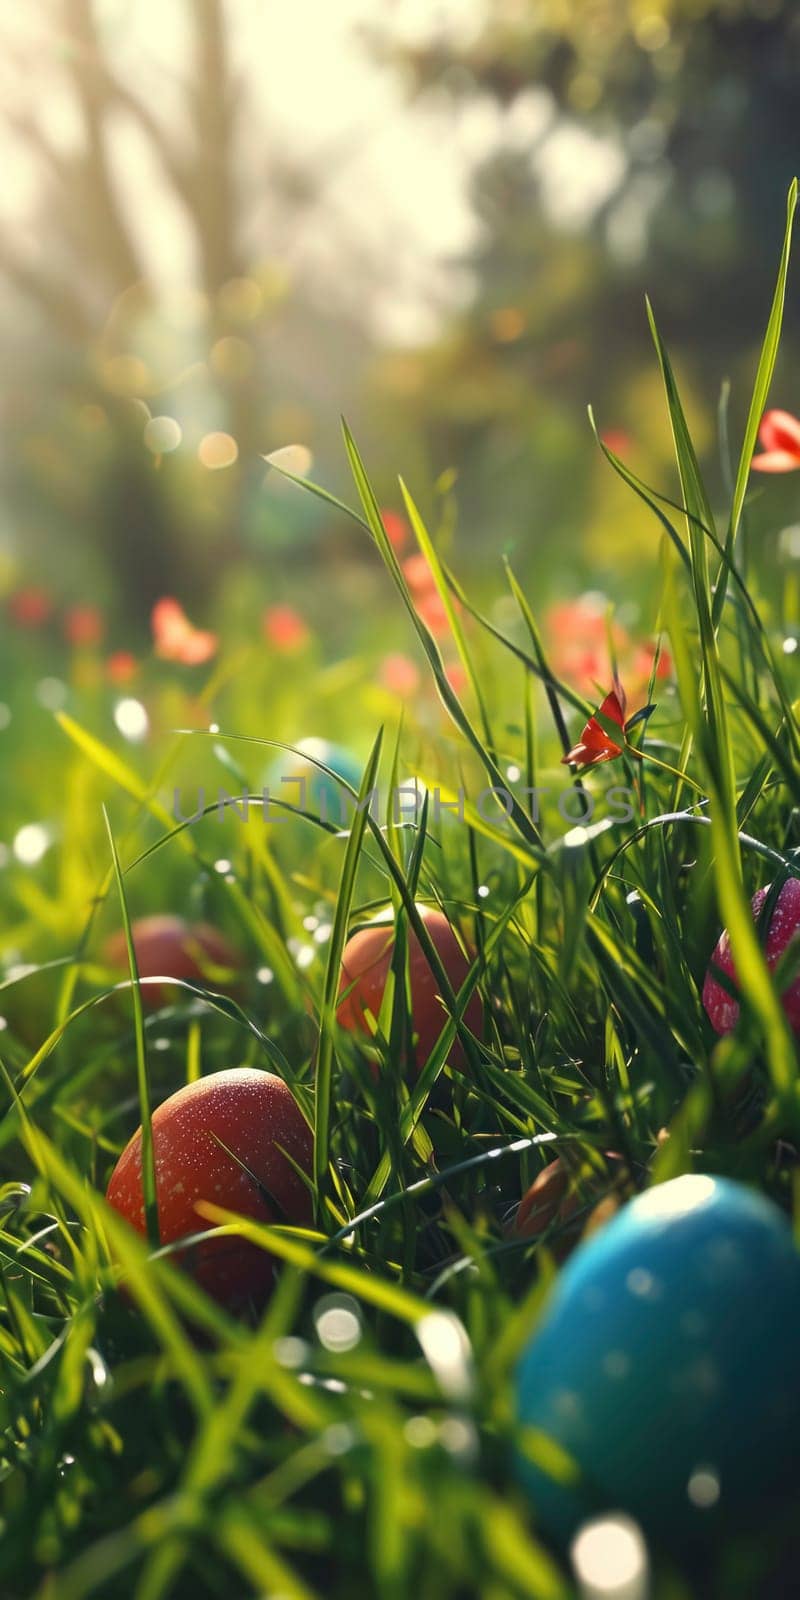 Colorful Easter eggs nestled in the grass, surrounded by fresh spring flowers, capturing the joy of an Easter egg hunt.